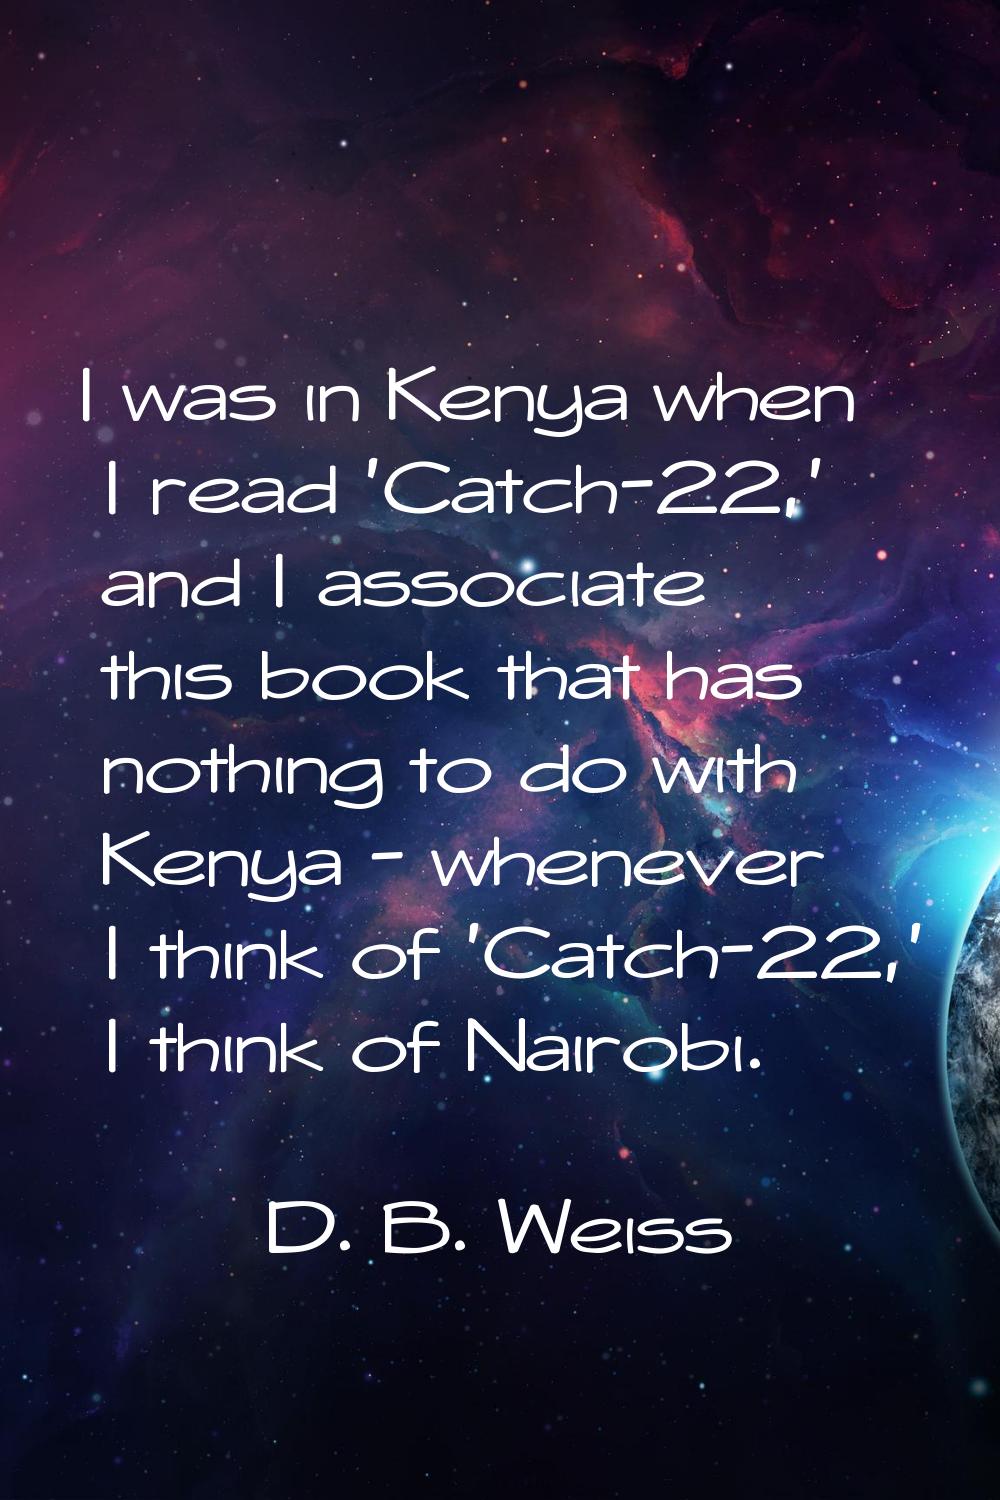 I was in Kenya when I read 'Catch-22,' and I associate this book that has nothing to do with Kenya 